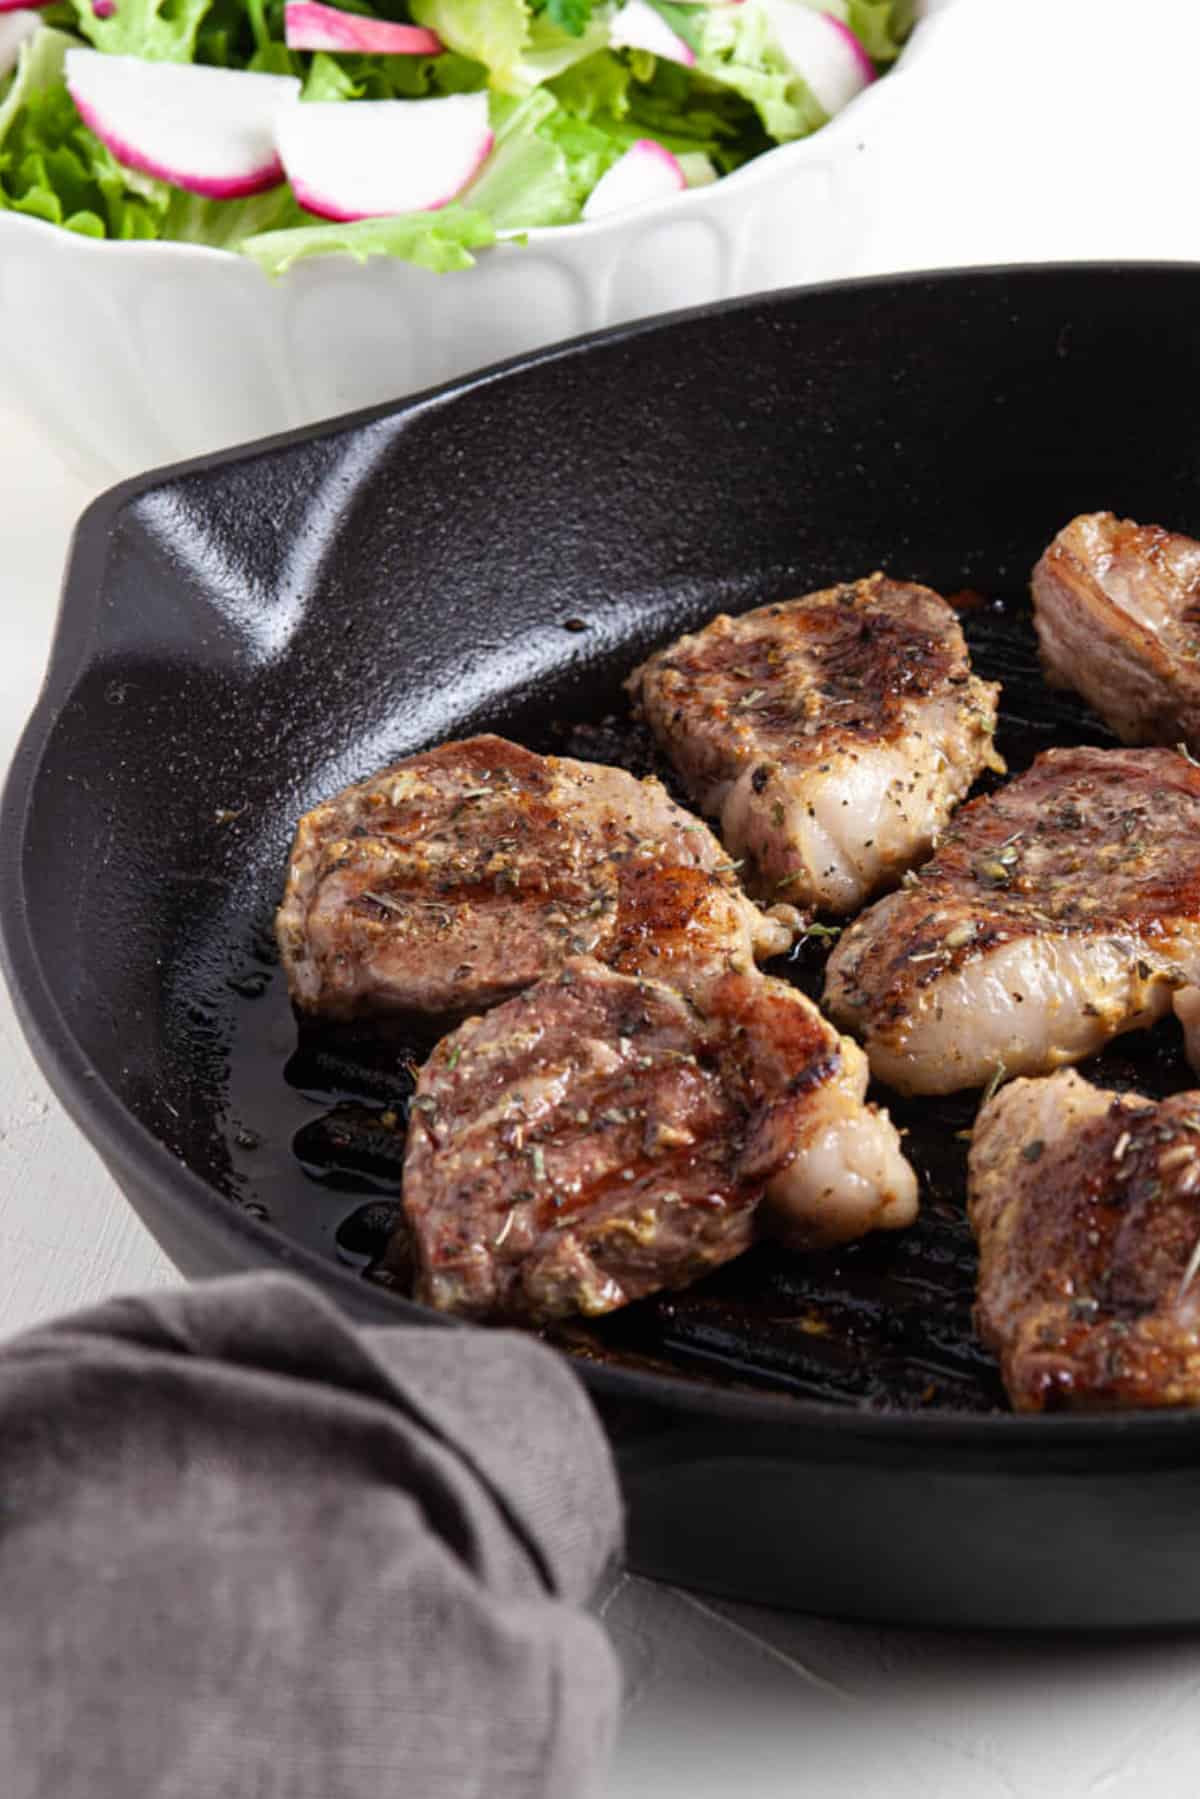 Pan seared lamb chops served in a cast iron skillet.